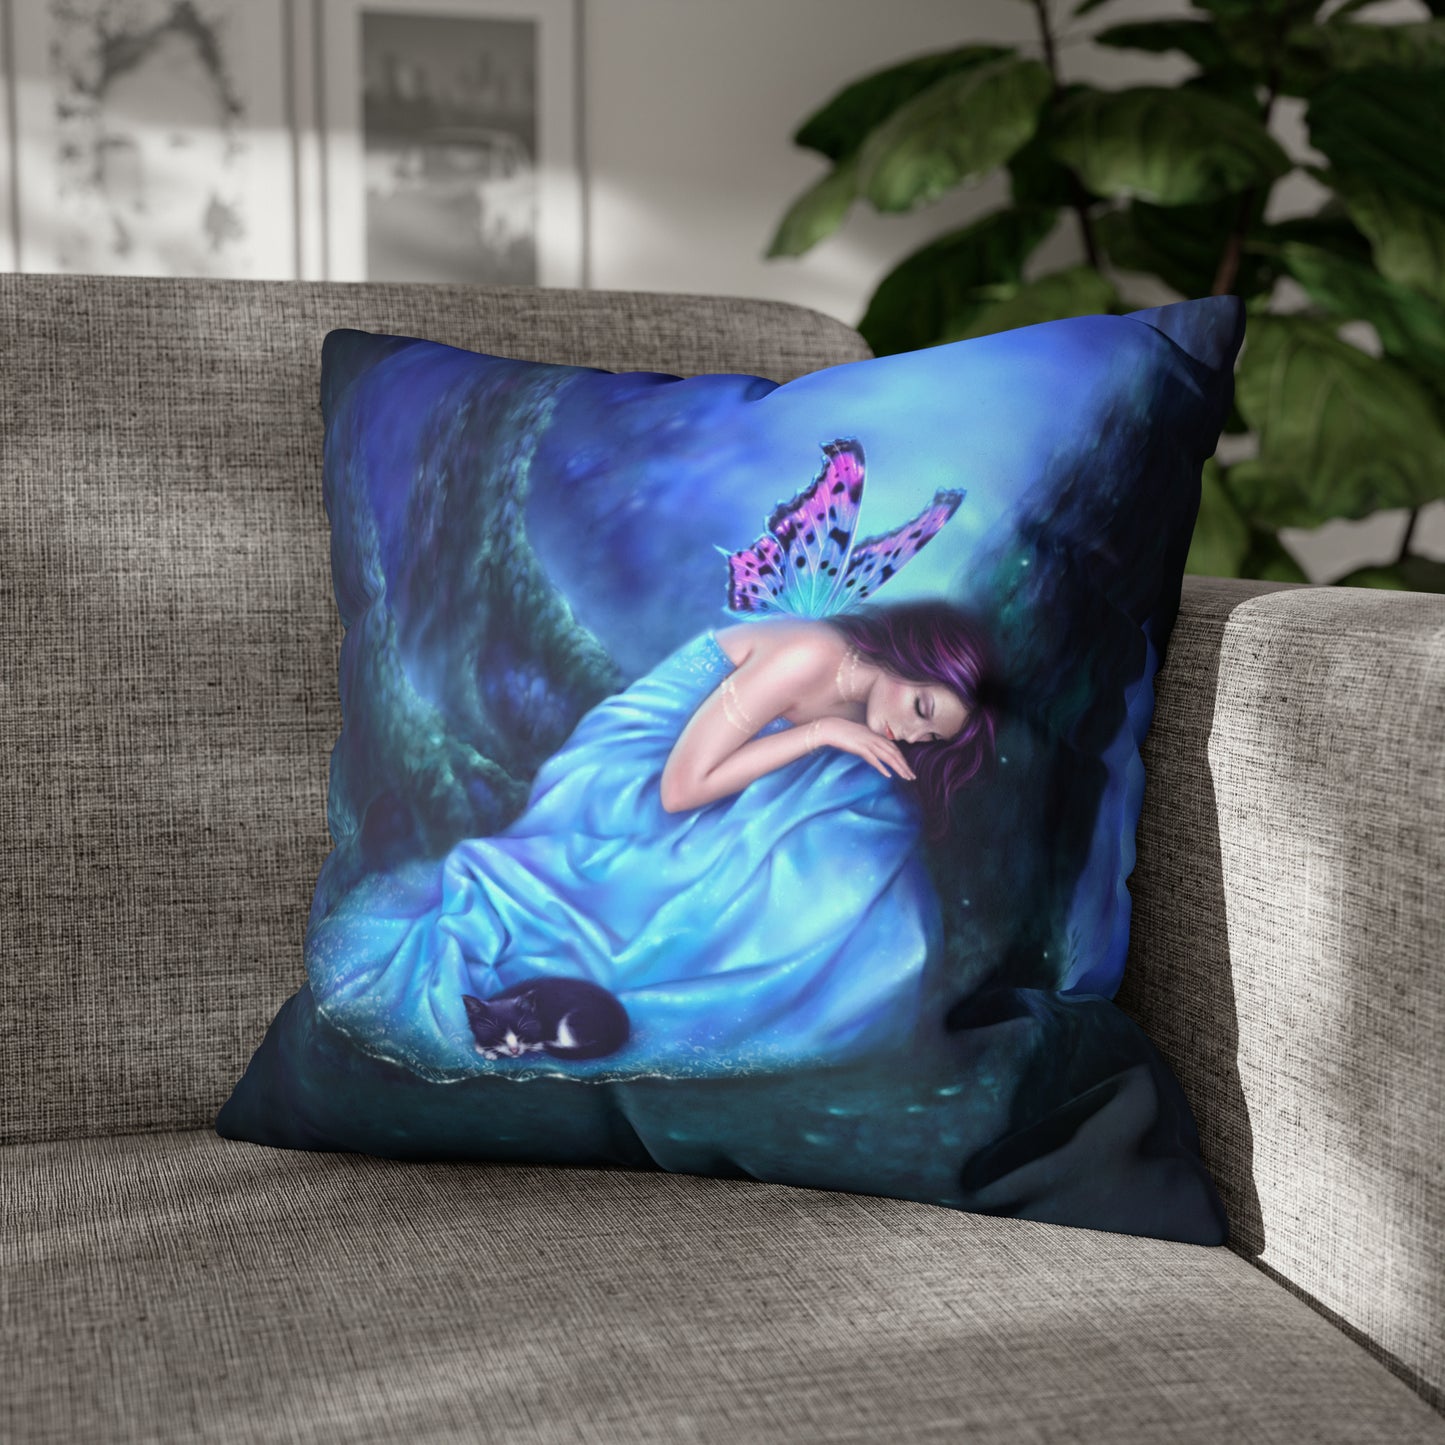 Throw Pillow Cover - Serenity